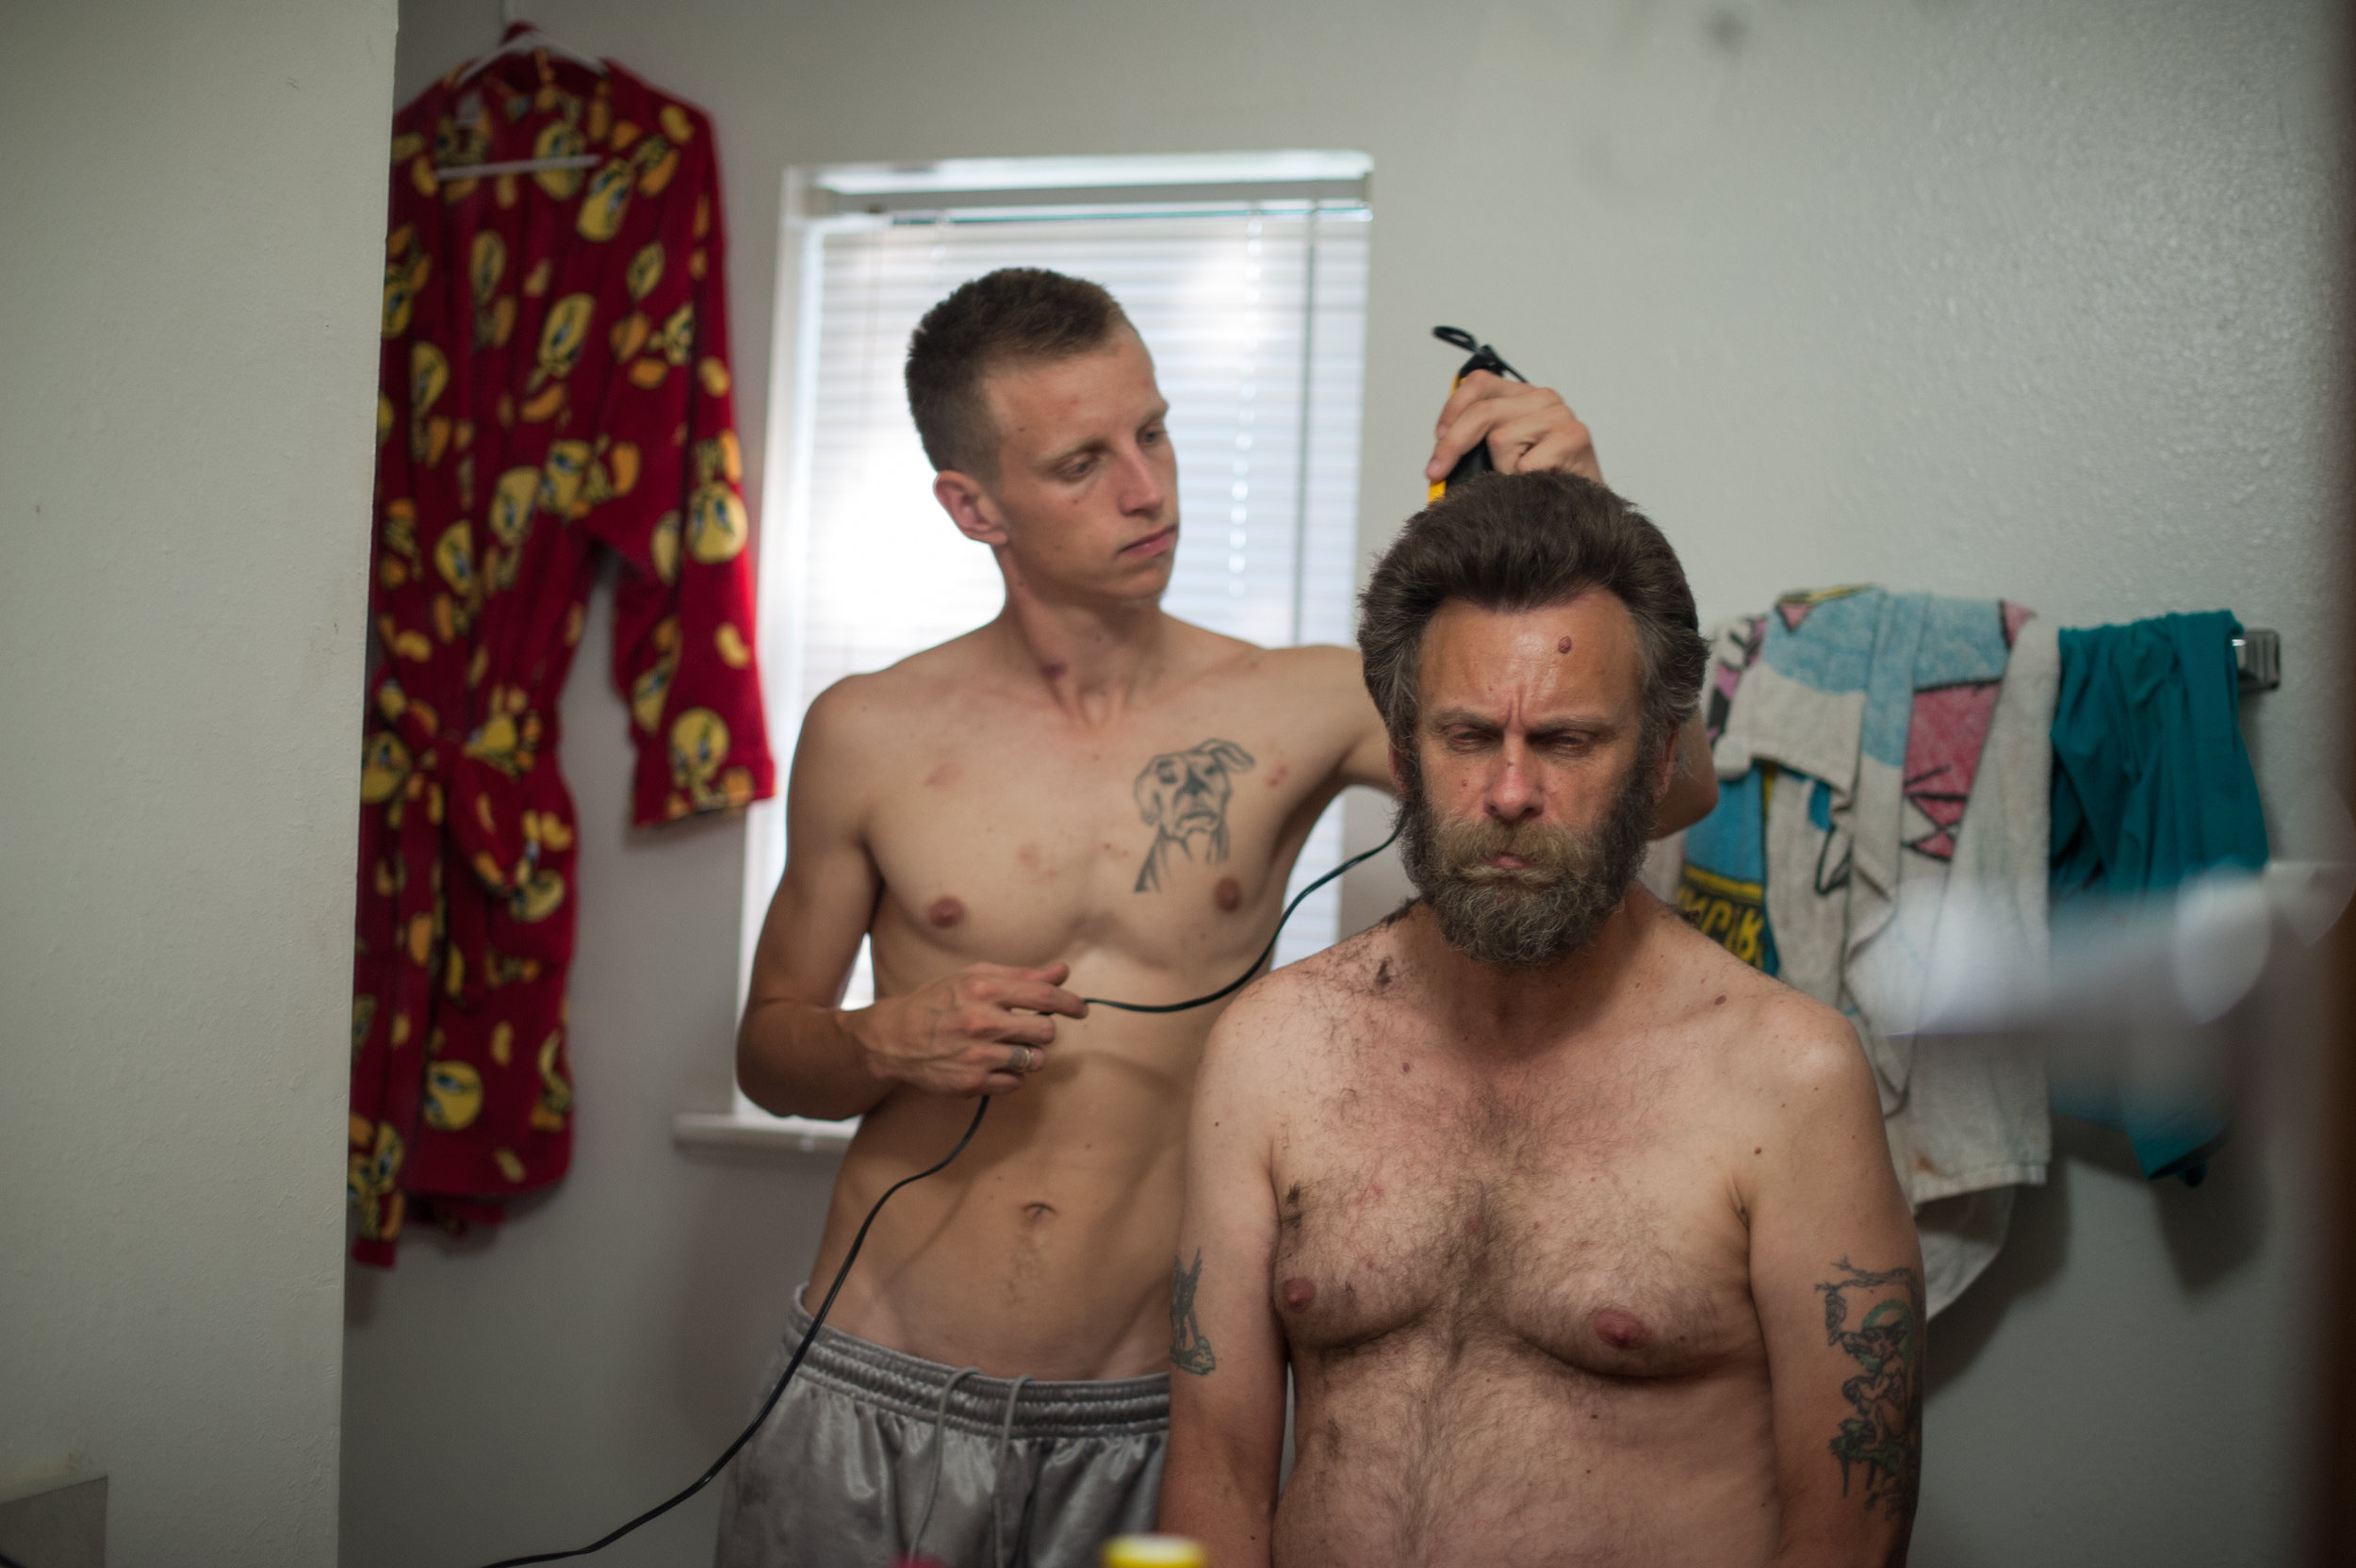  David, age 21, shaves his dad, Dave’s, head before David’s trial, 2014. 